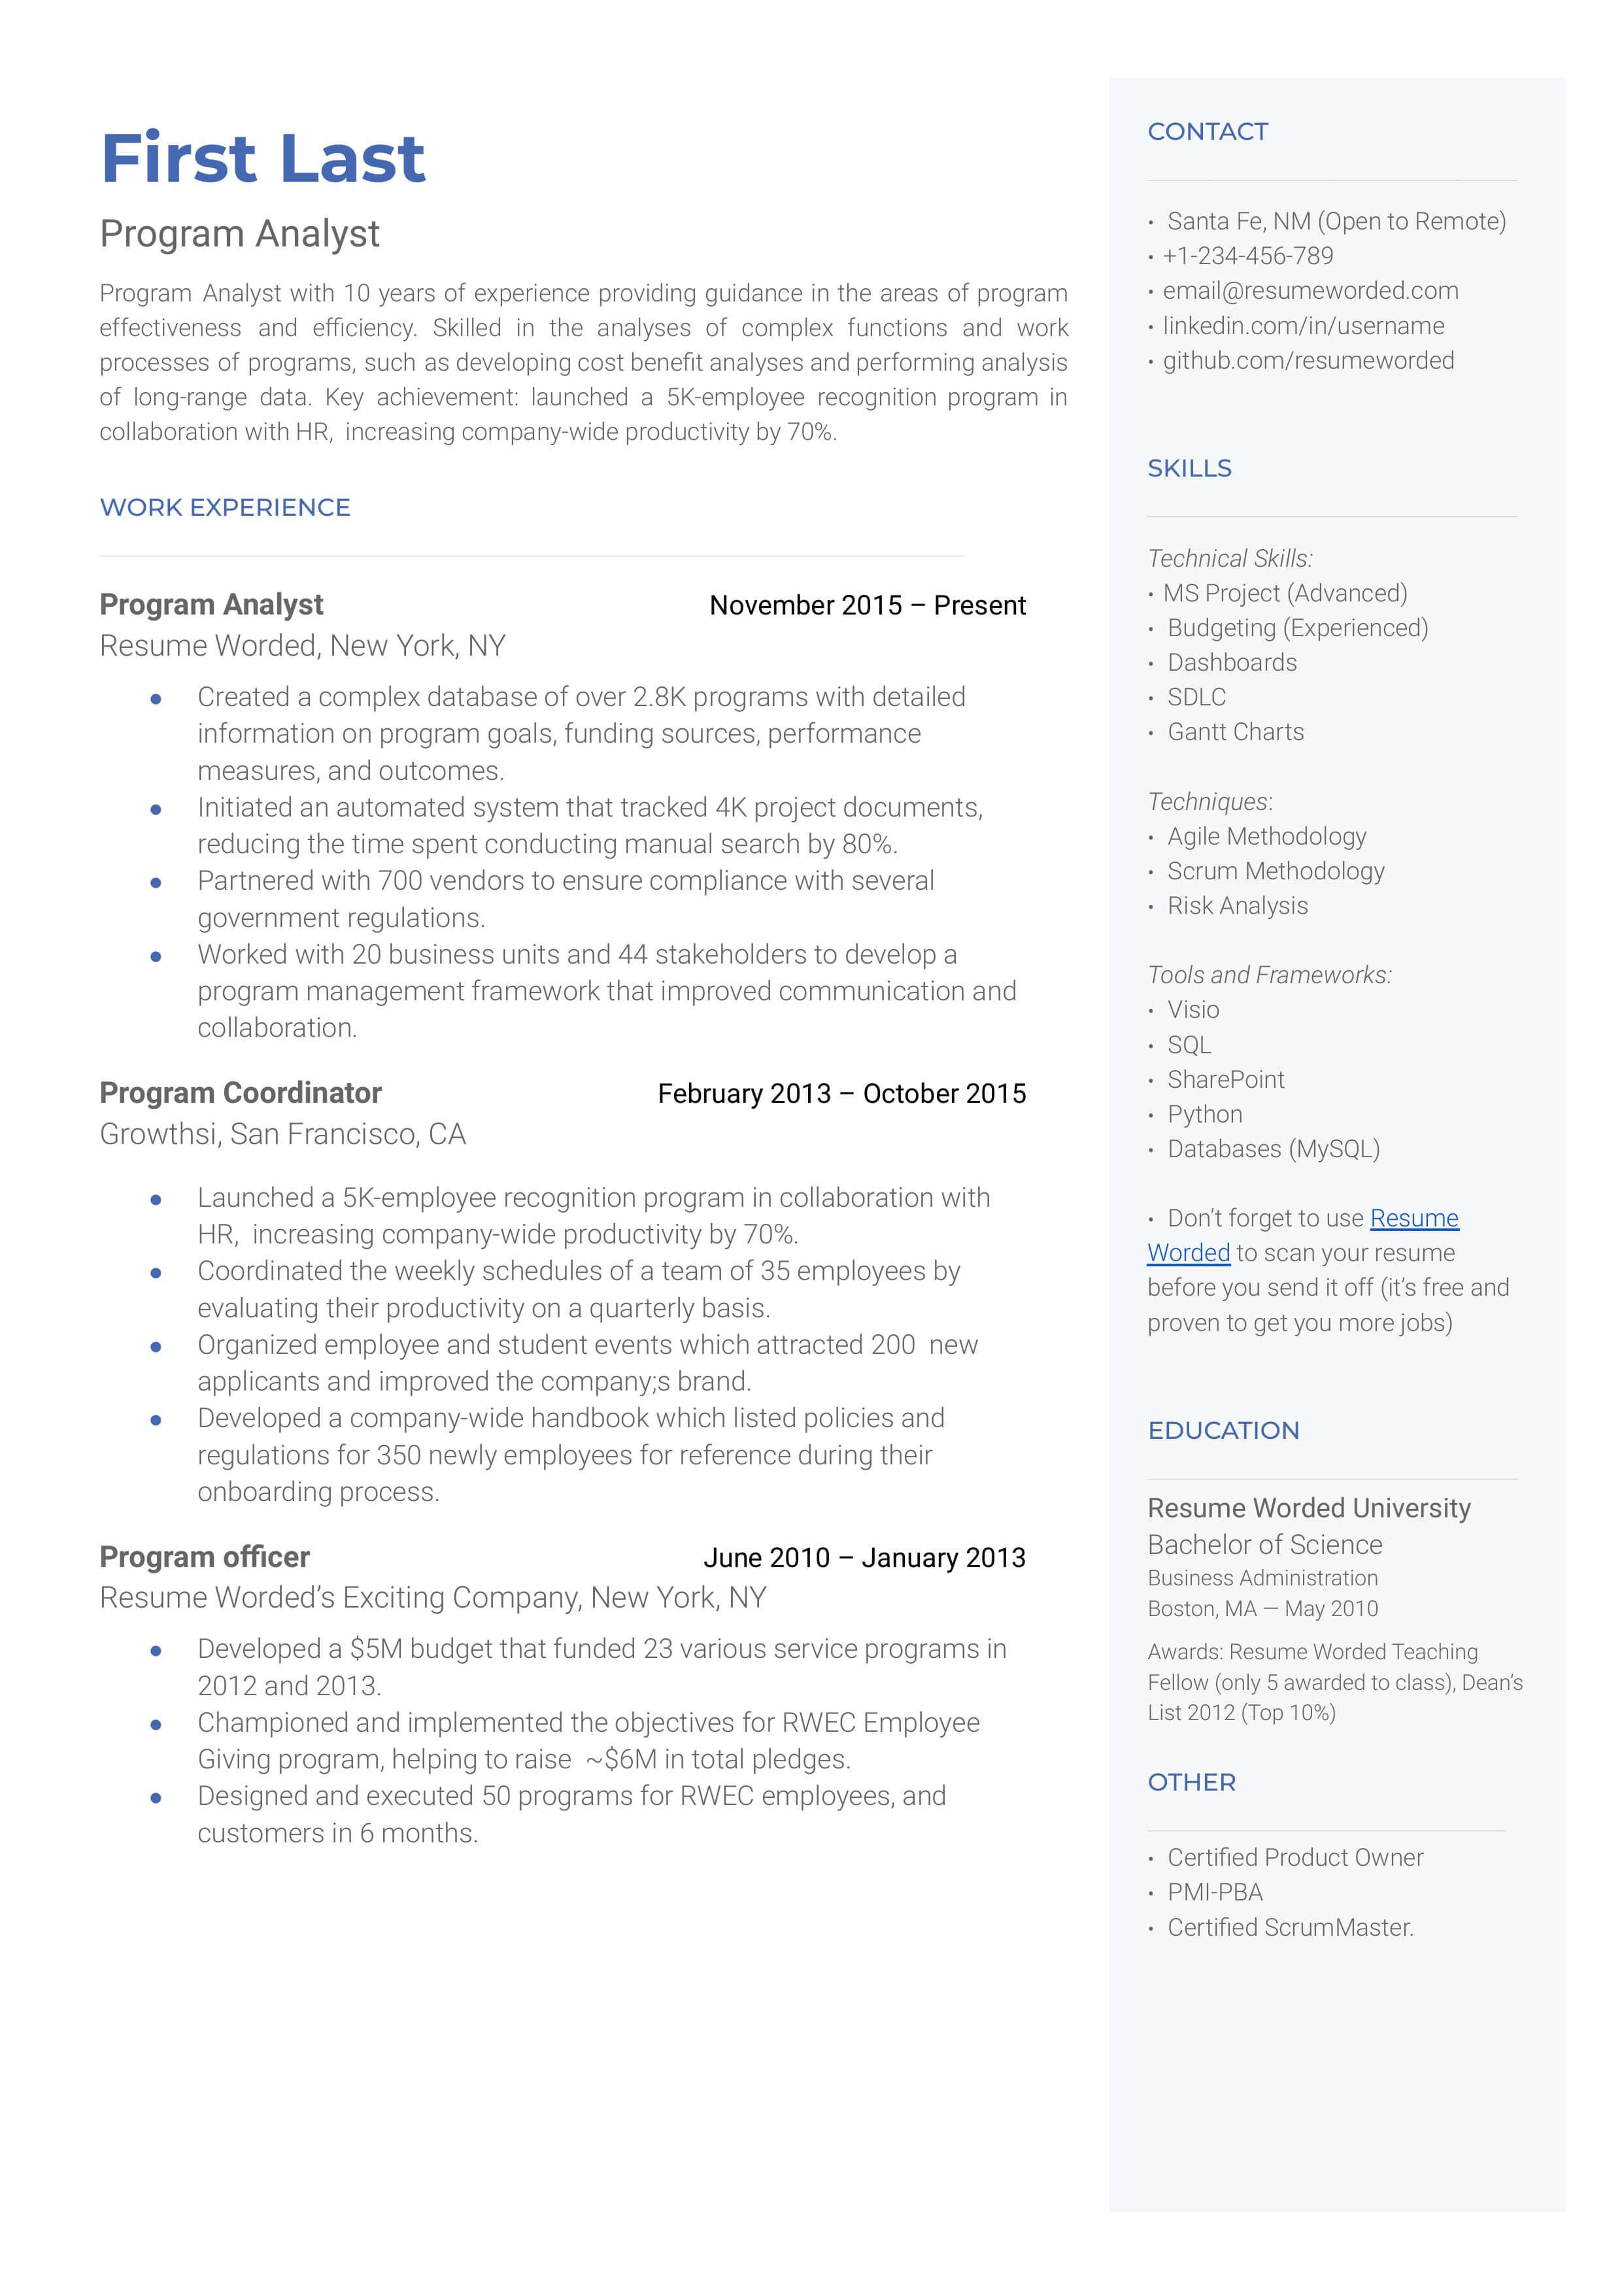 A well-structured CV for a Program Analyst role.